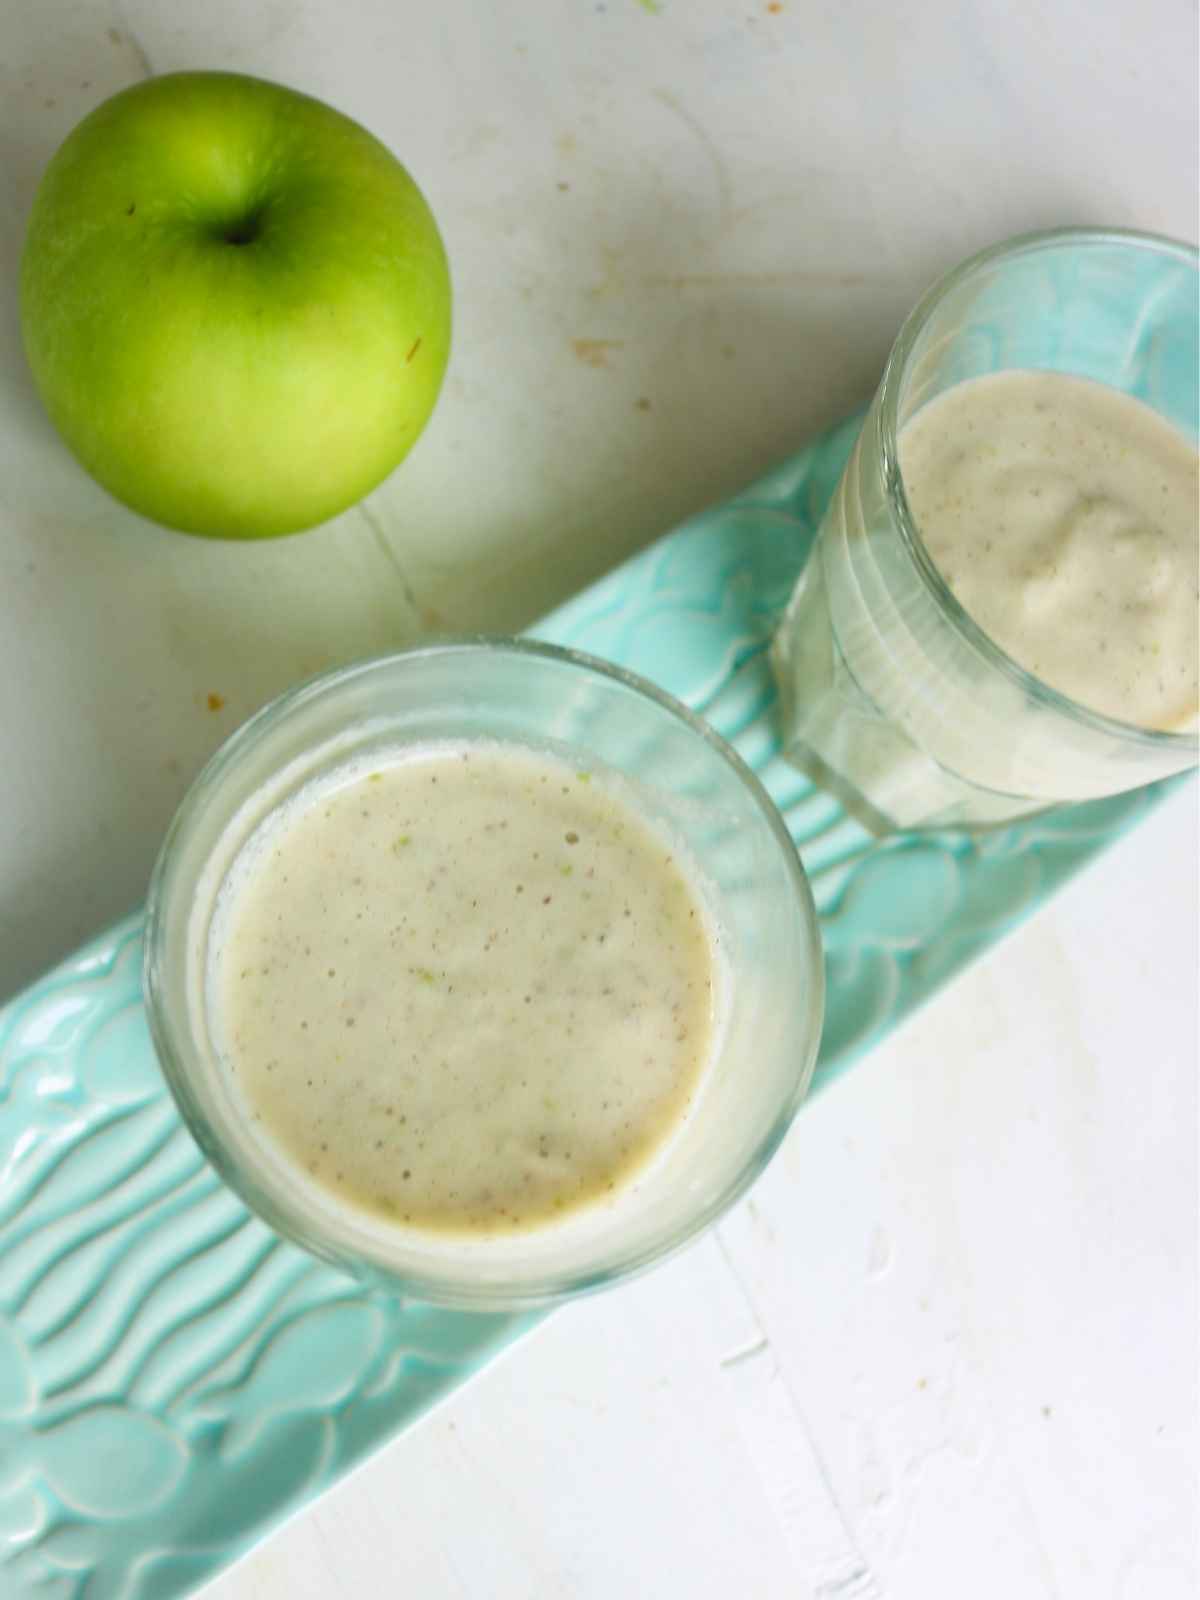 Green apple smoothie served in two glasses placed on a tray and green apple on the background.